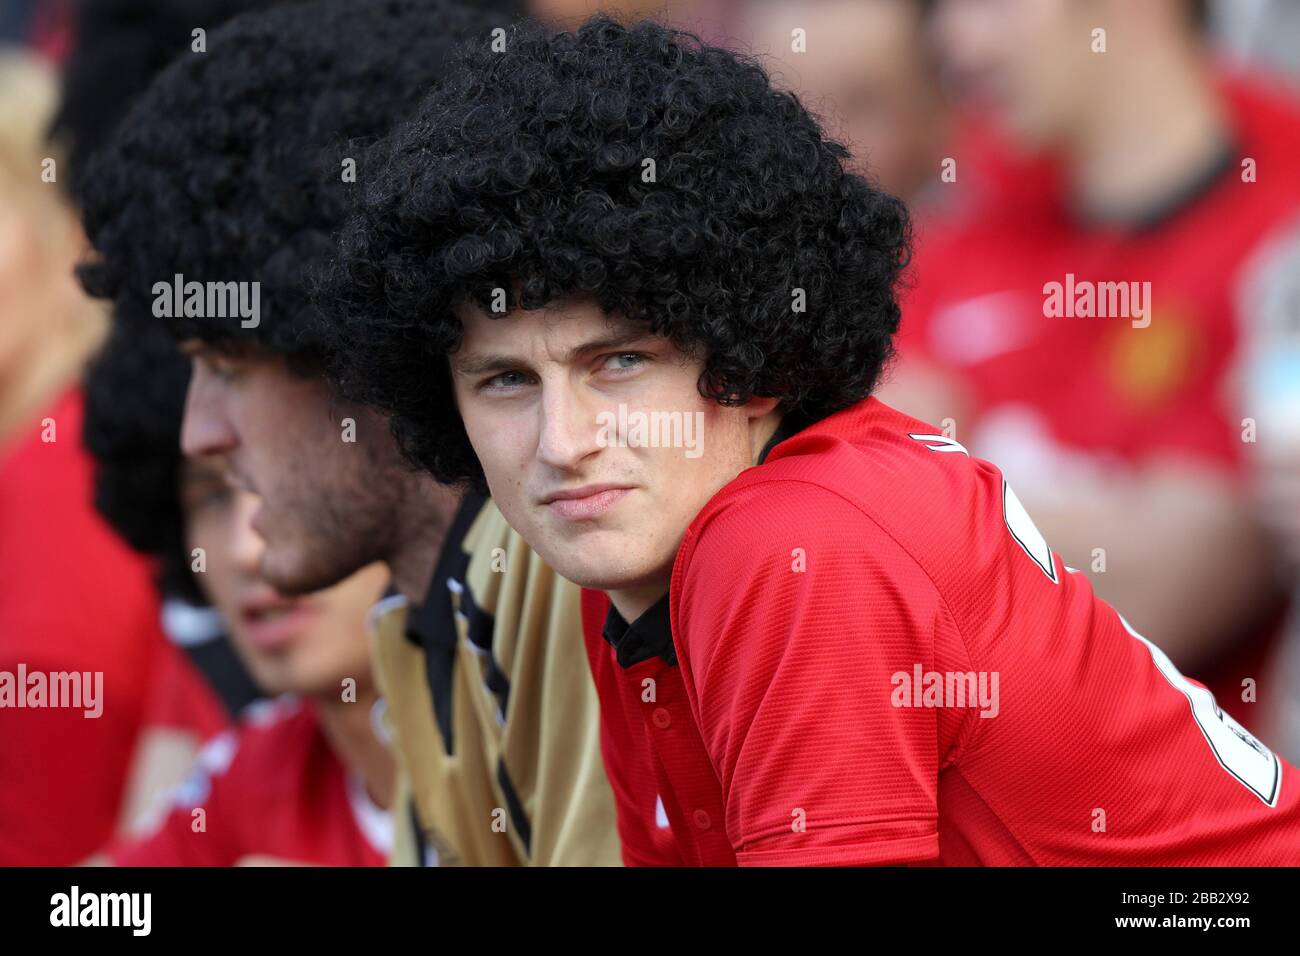 A Manchester United fan wears a wig imitating Marouane Fellaini in the stands Stock Photo